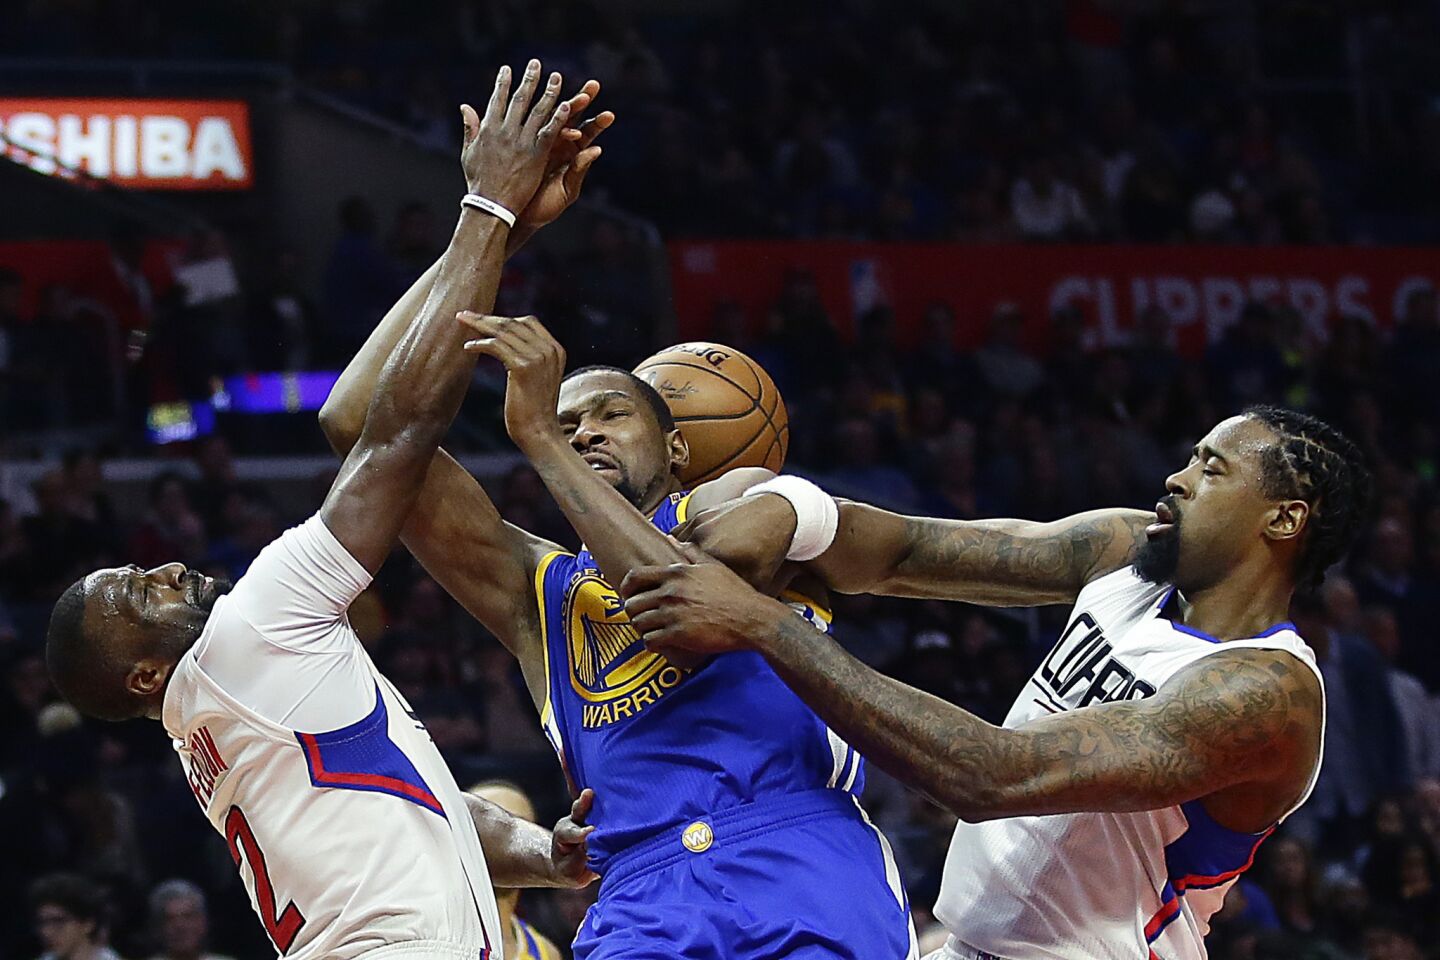 Warriors forward Kevin Durant is fouled by Clippers center DeAndre Jordan, right, after driving down the lane against guard Raymond Felton (2) during the second half.